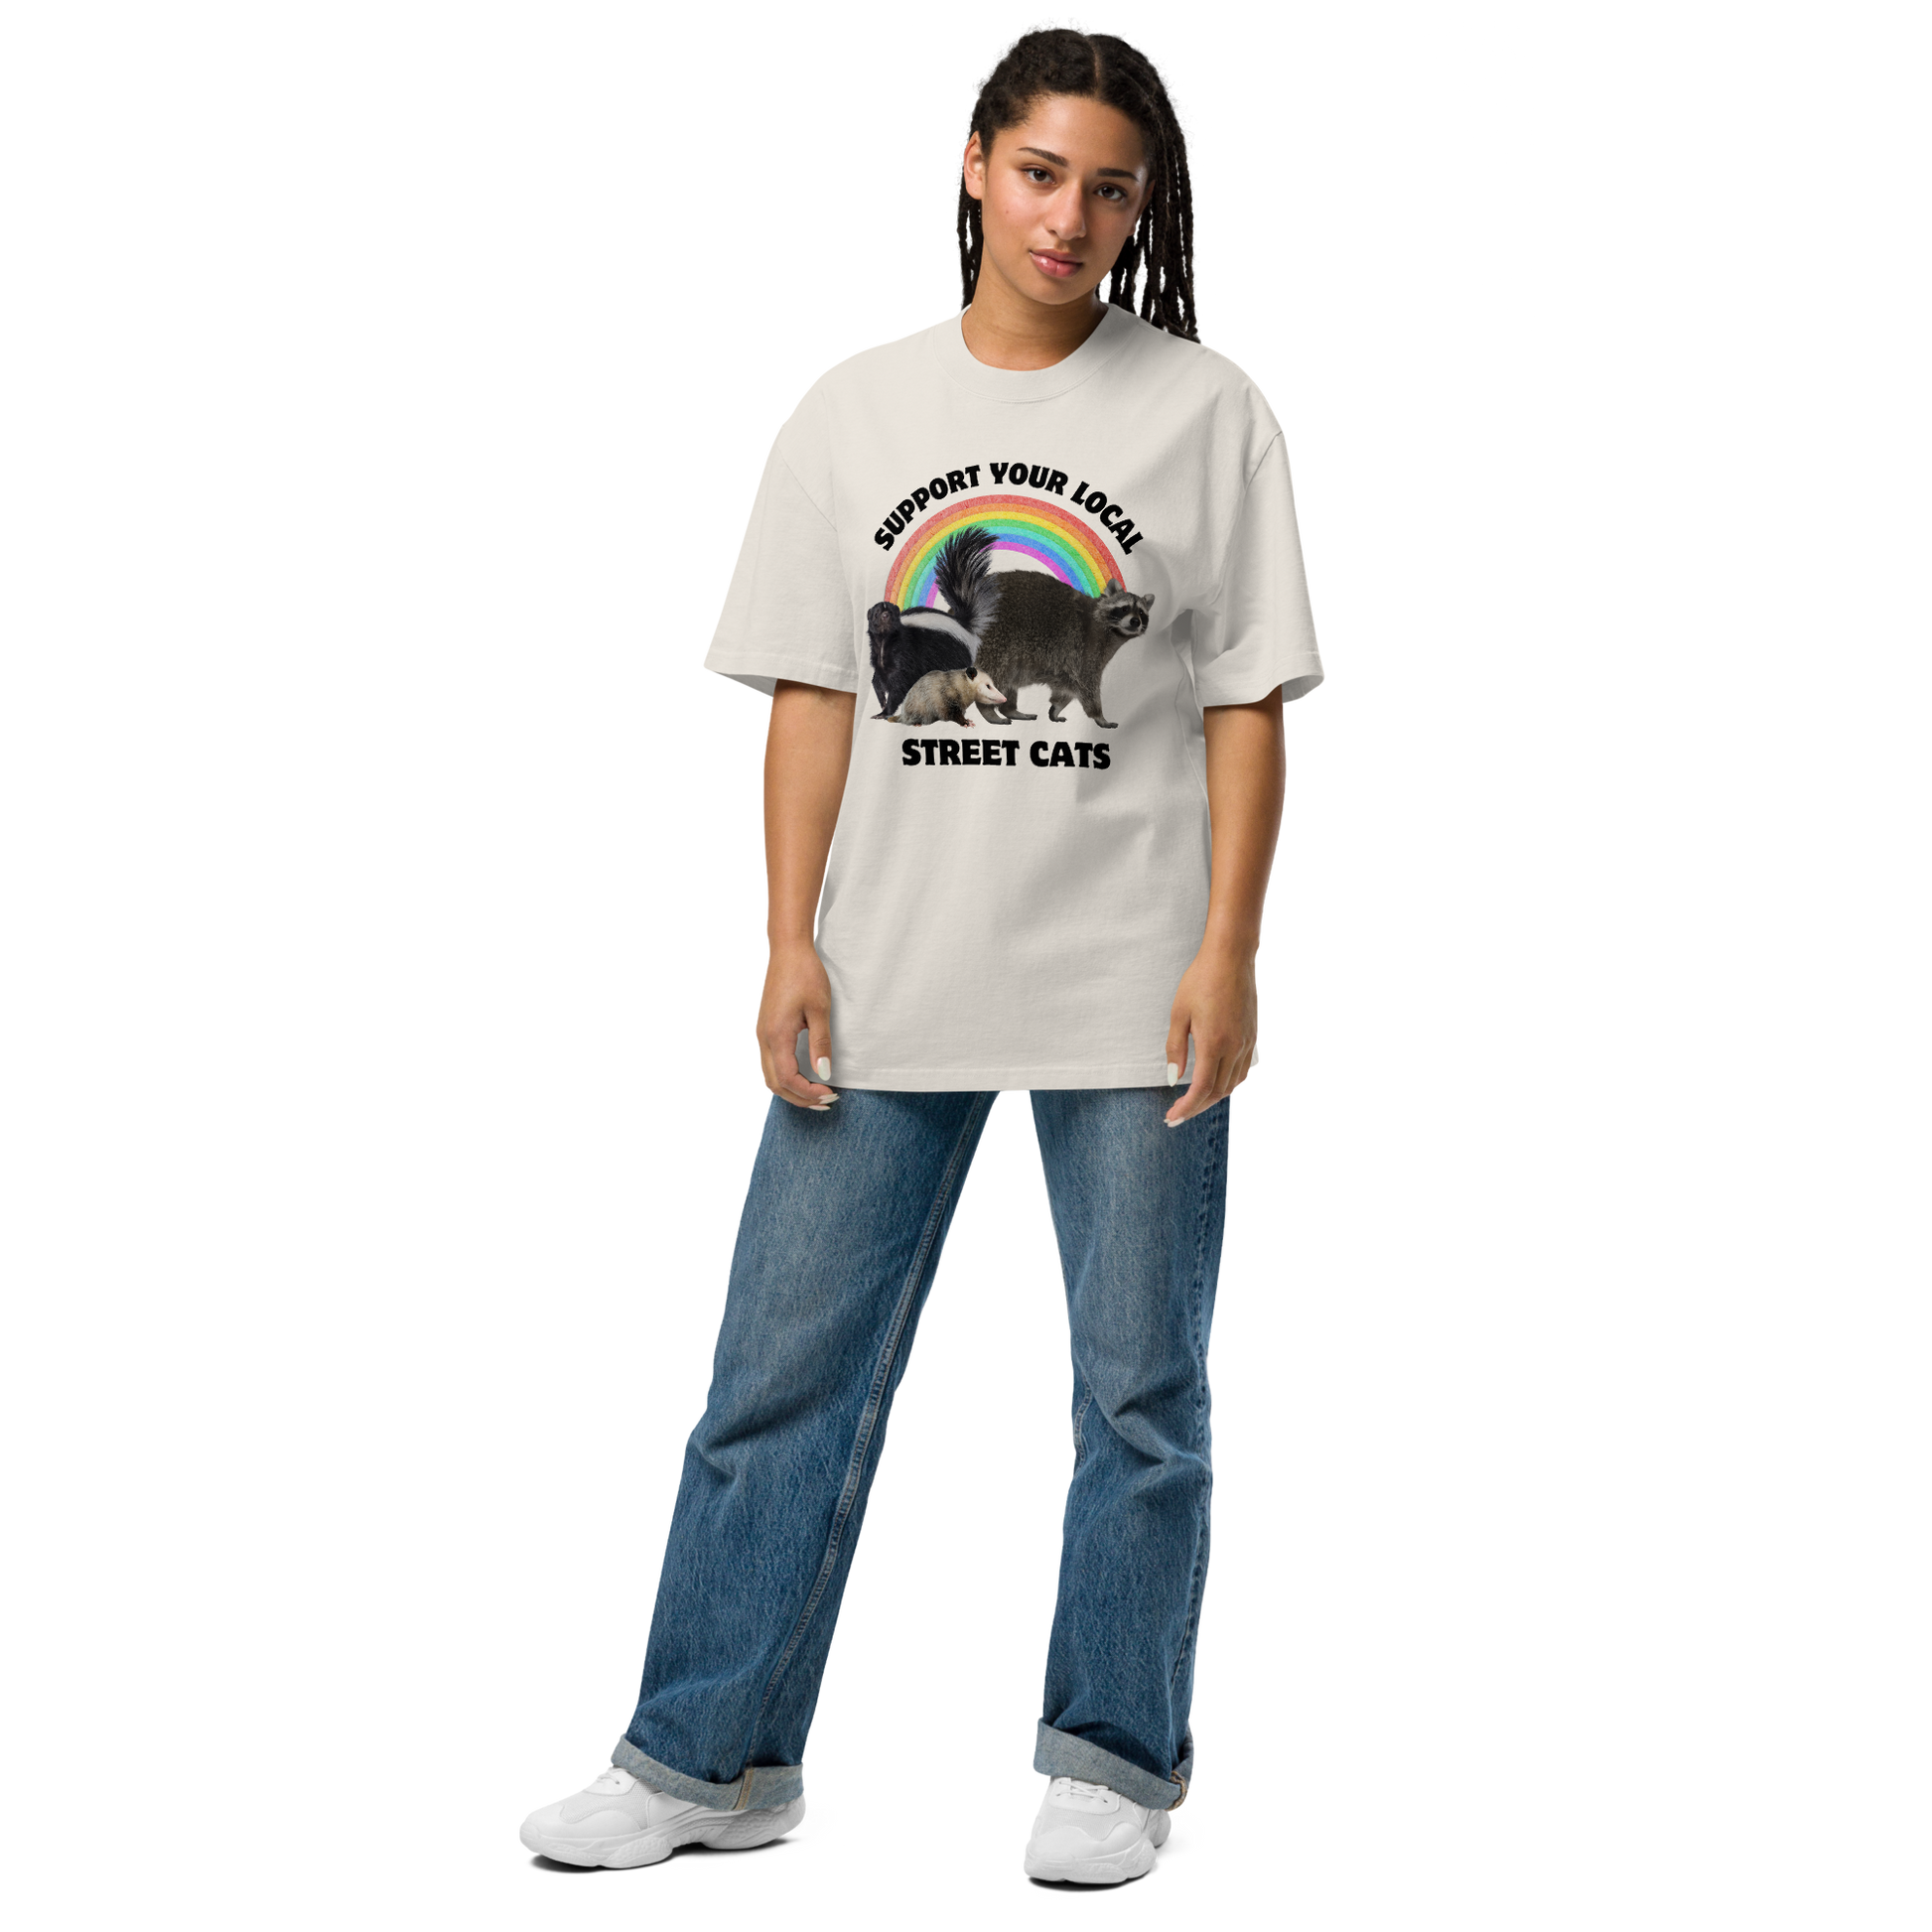 Woman wearing a Faded Bone Street Cats Oversized T-Shirt featuring a purr-fect trio – opossum, skunk, raccoon – and the Support Your Local Street Cats graphic on the chest - Funny Graphic Animal Oversized Tees - Boozy Fox